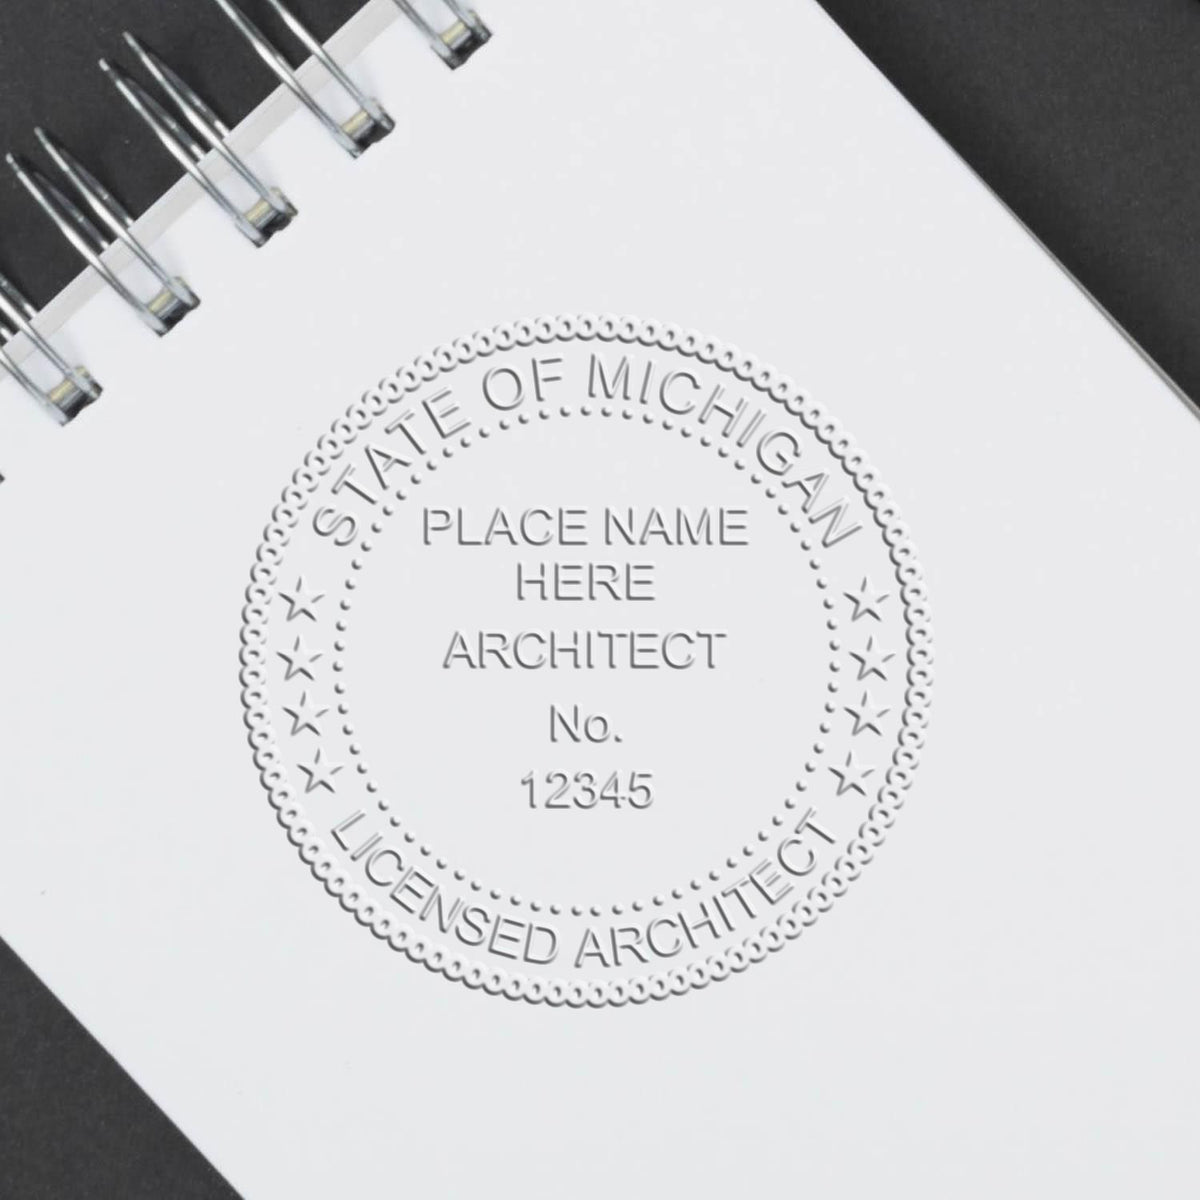 This paper is stamped with a sample imprint of the Extended Long Reach Michigan Architect Seal Embosser, signifying its quality and reliability.